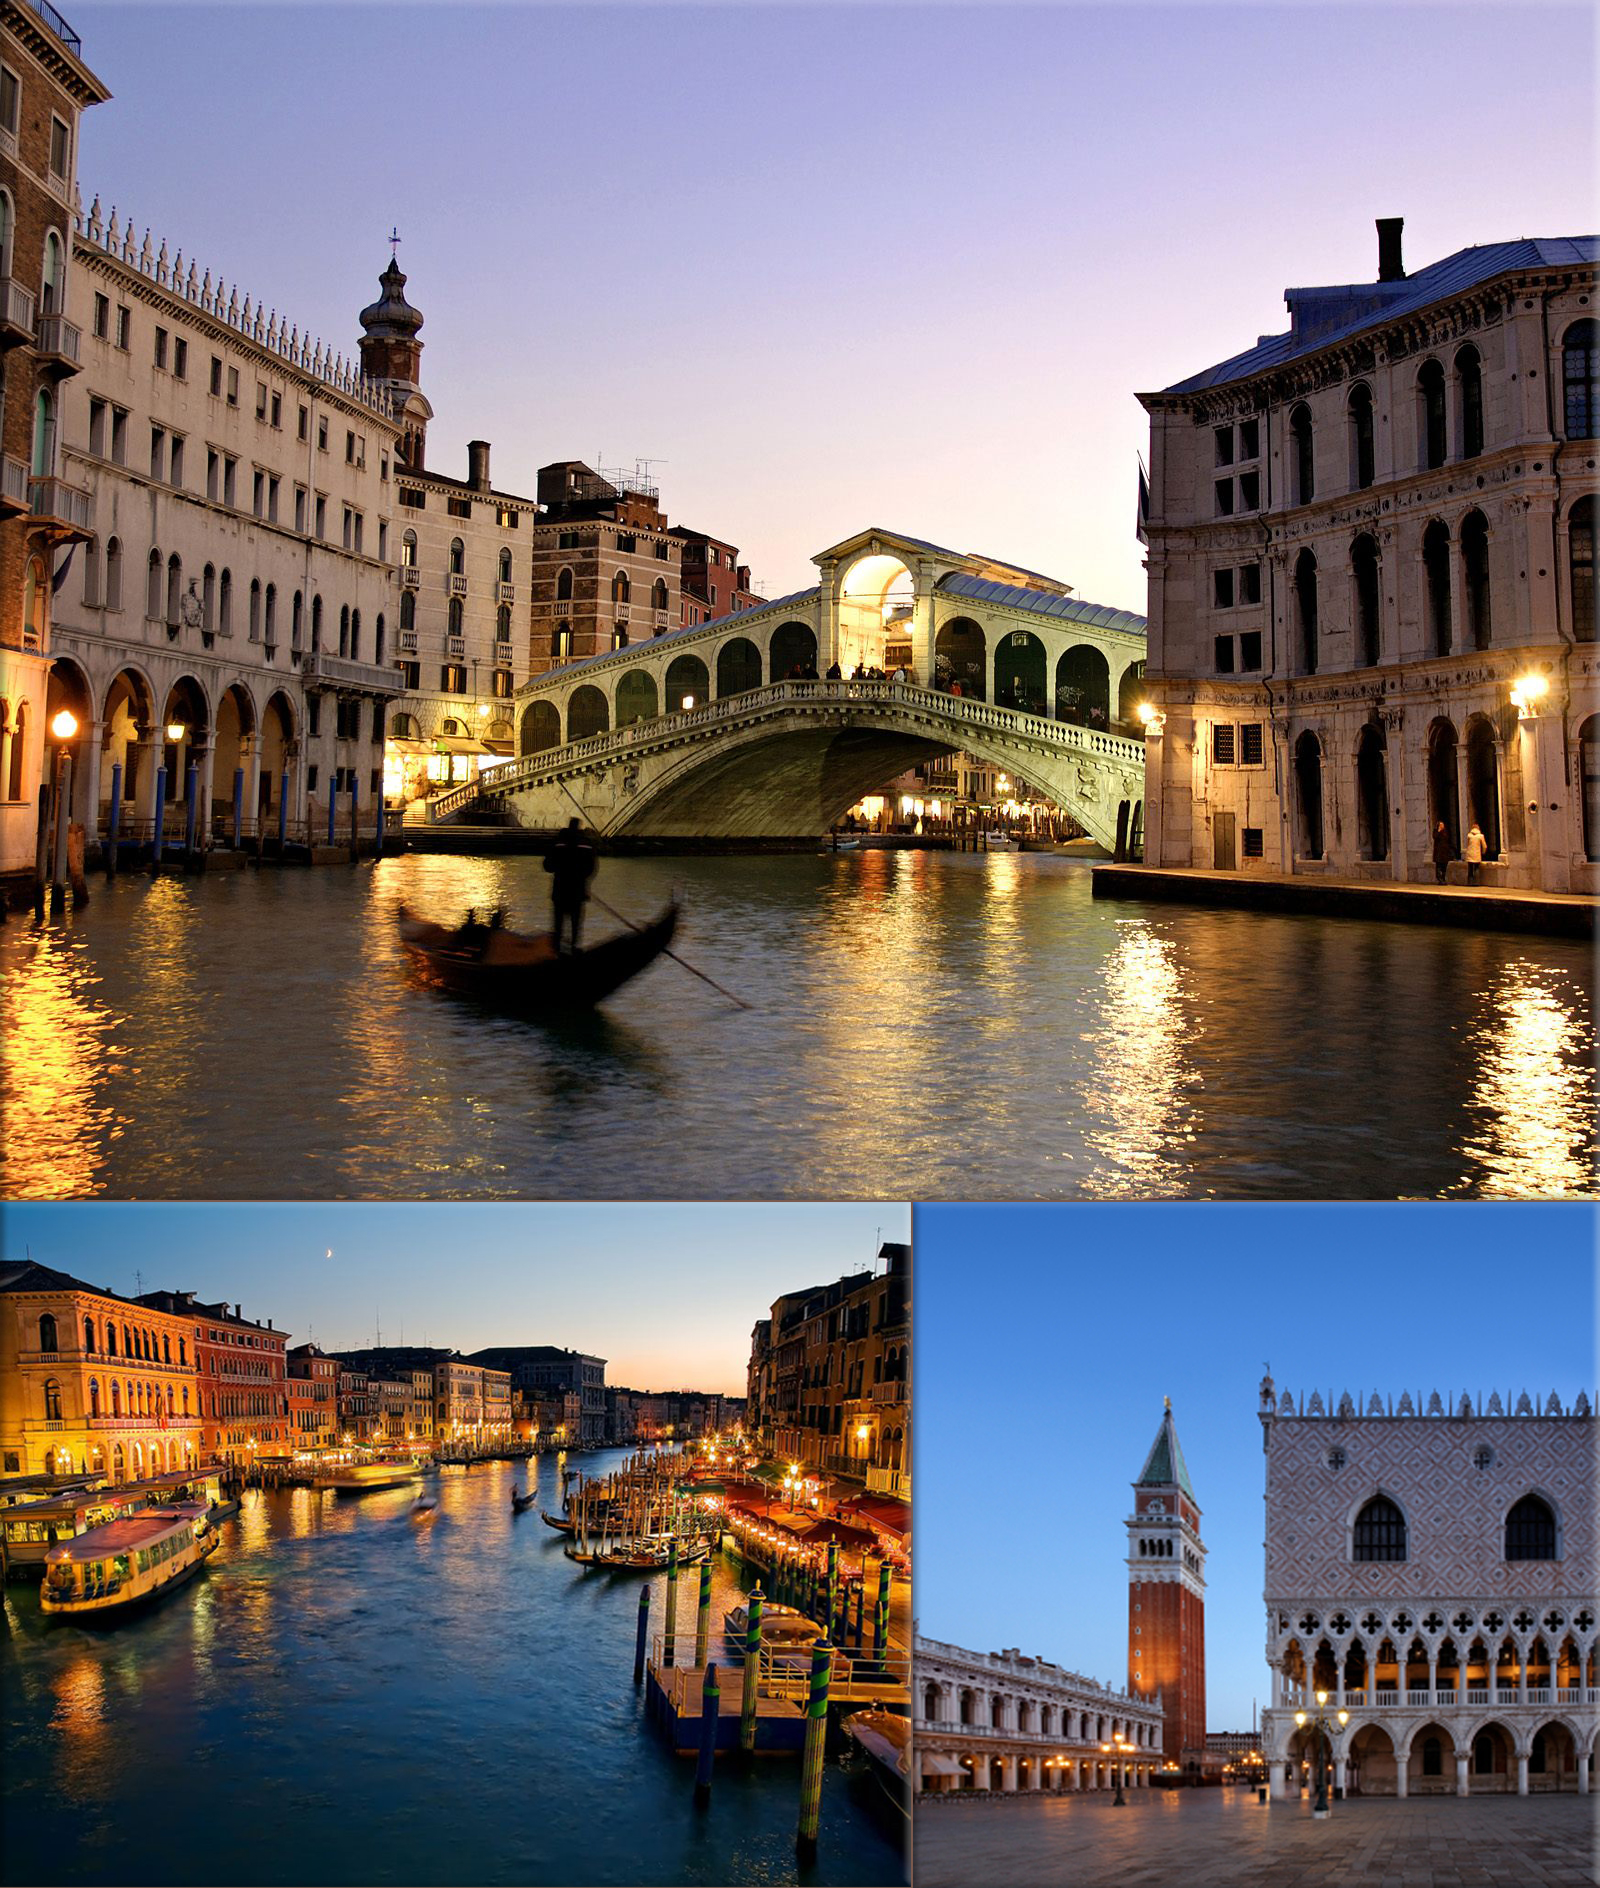 Venice is founded at twelve o'clock noon, according to legend